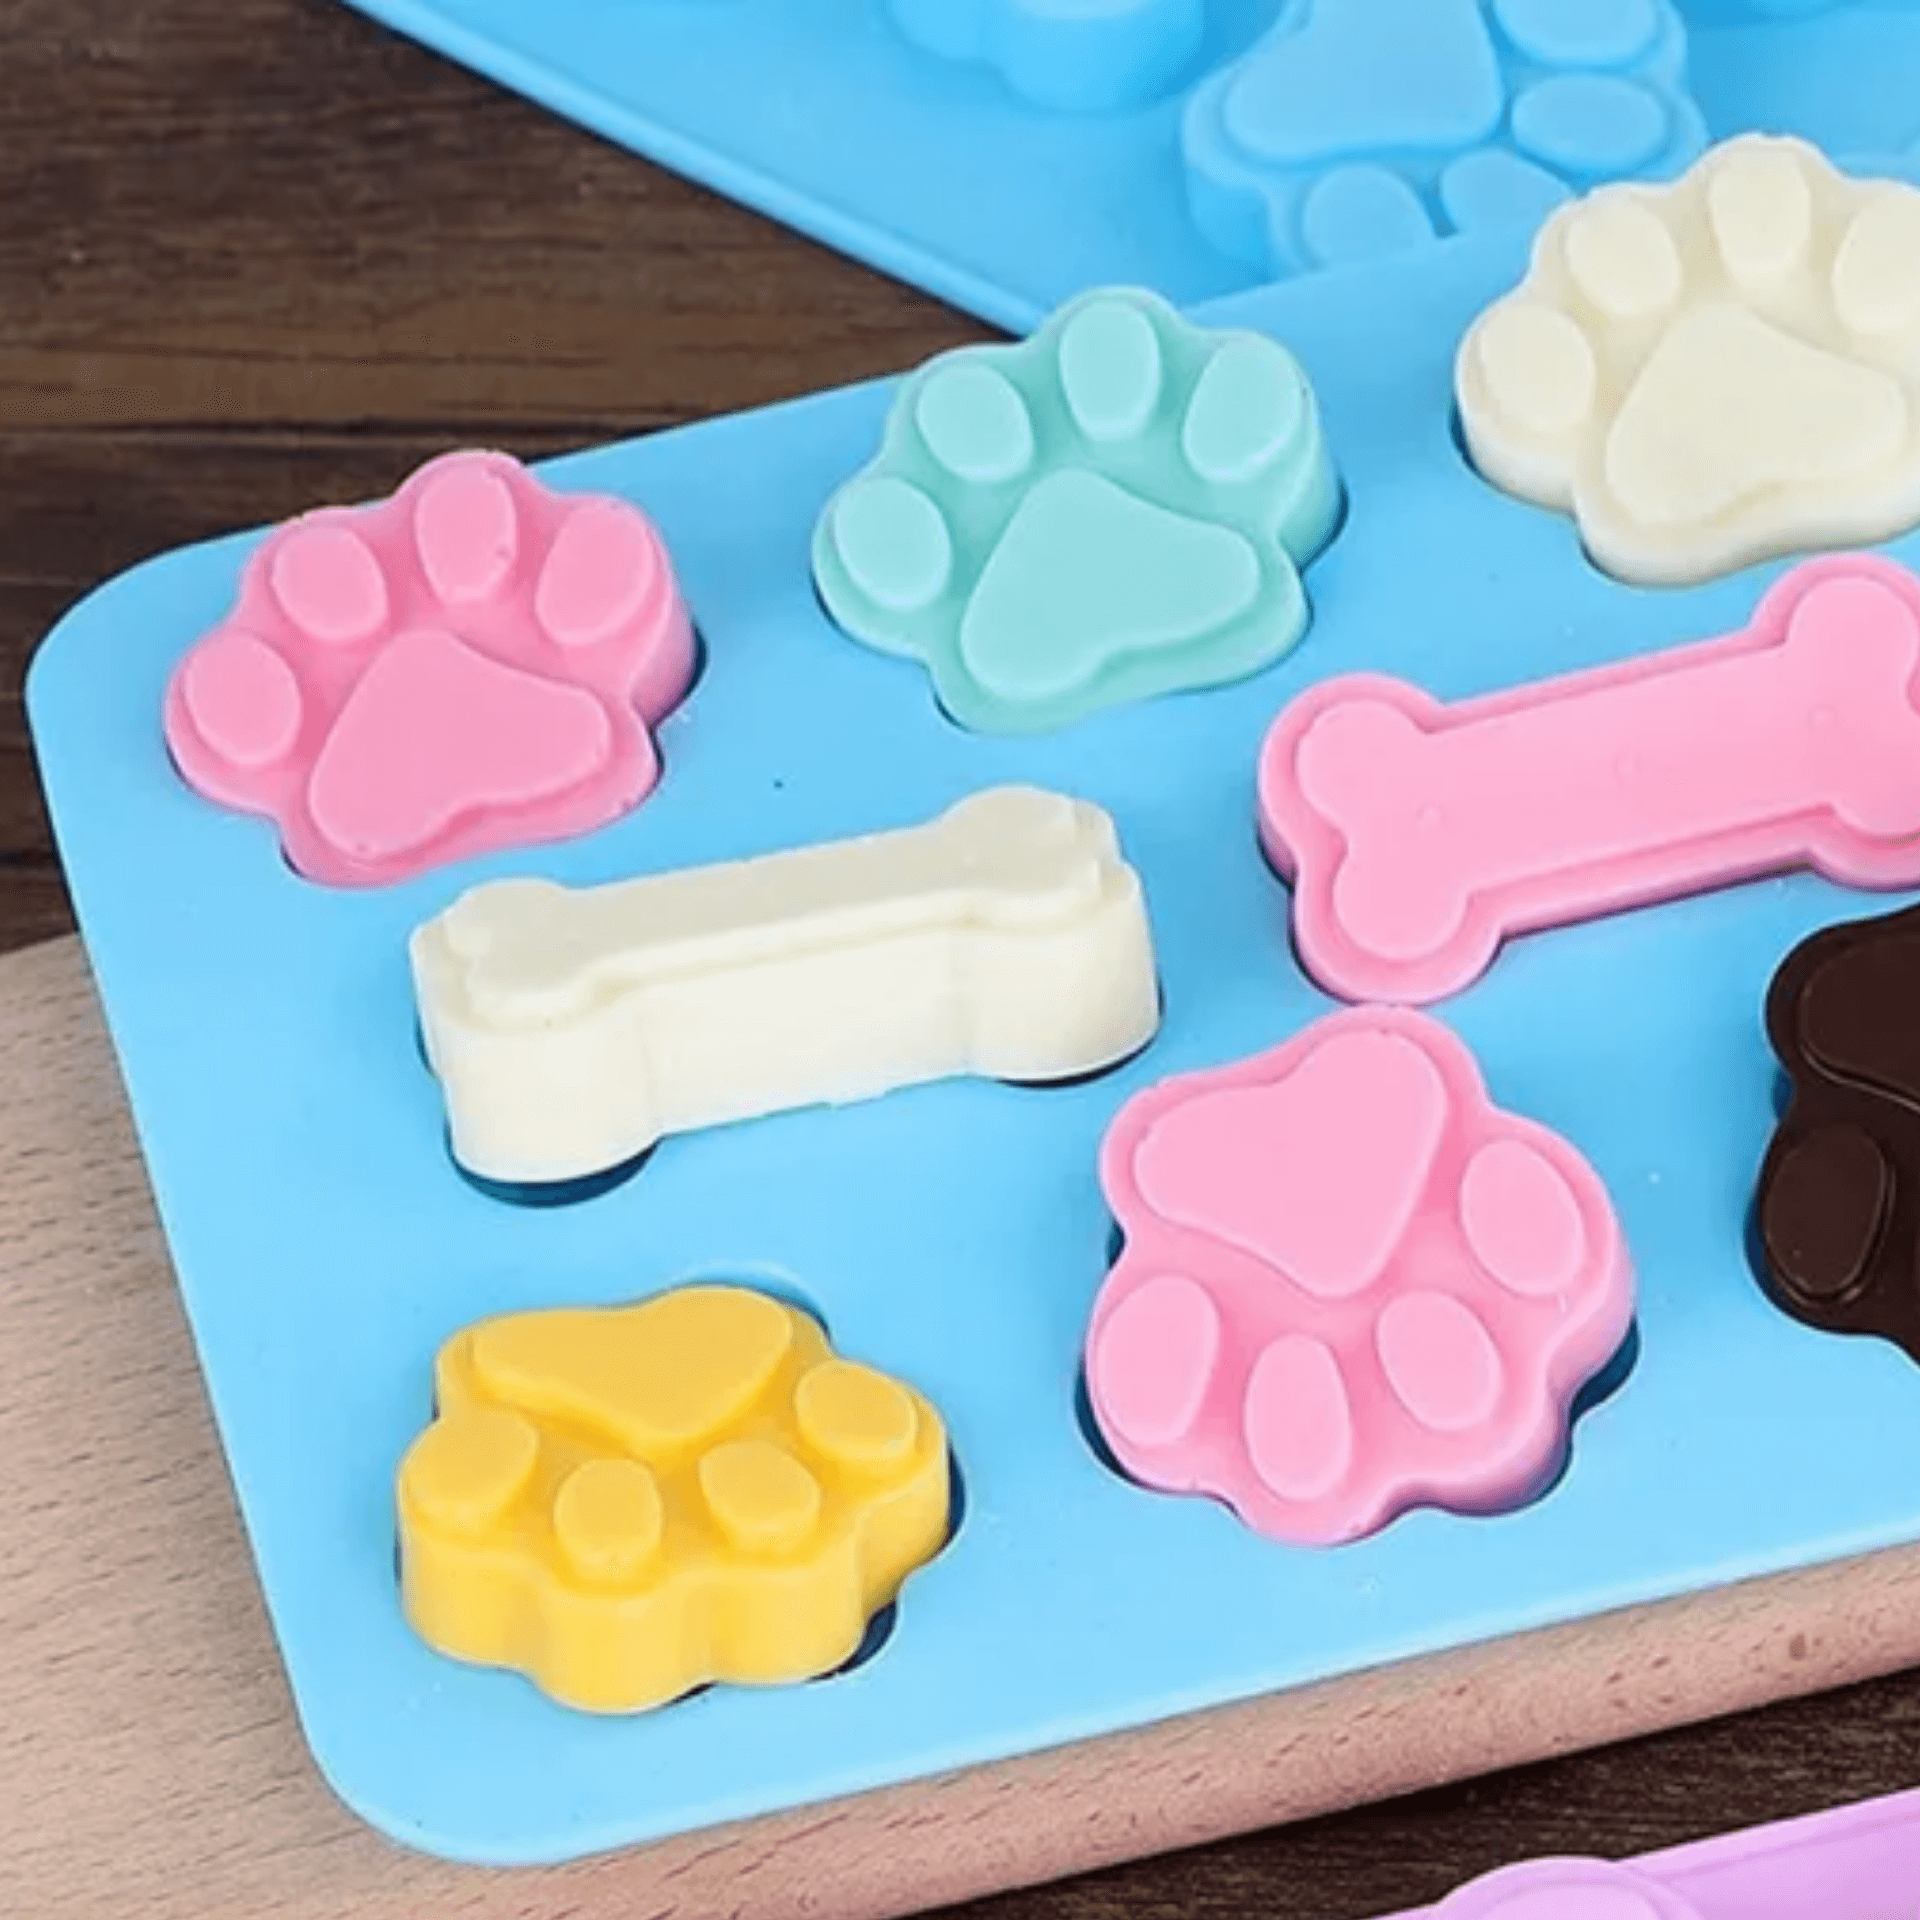 Paw and bone silicone mould for your dog